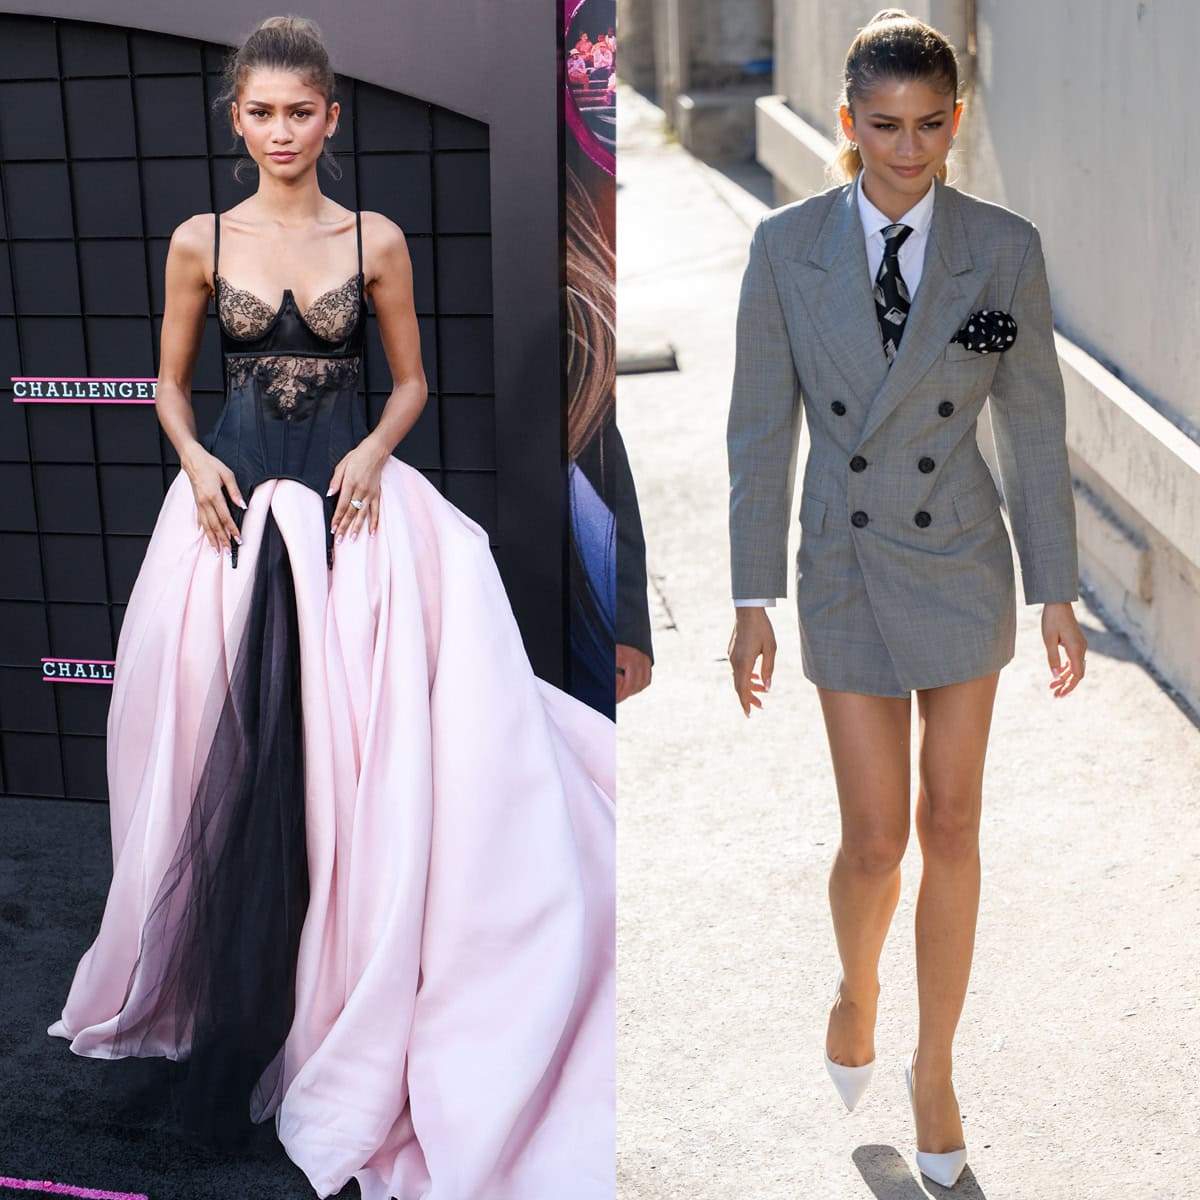 Zendaya makes a glamorous swerve from tennis whites as she promotes her upcoming sports drama Challengers in Los Angeles this week